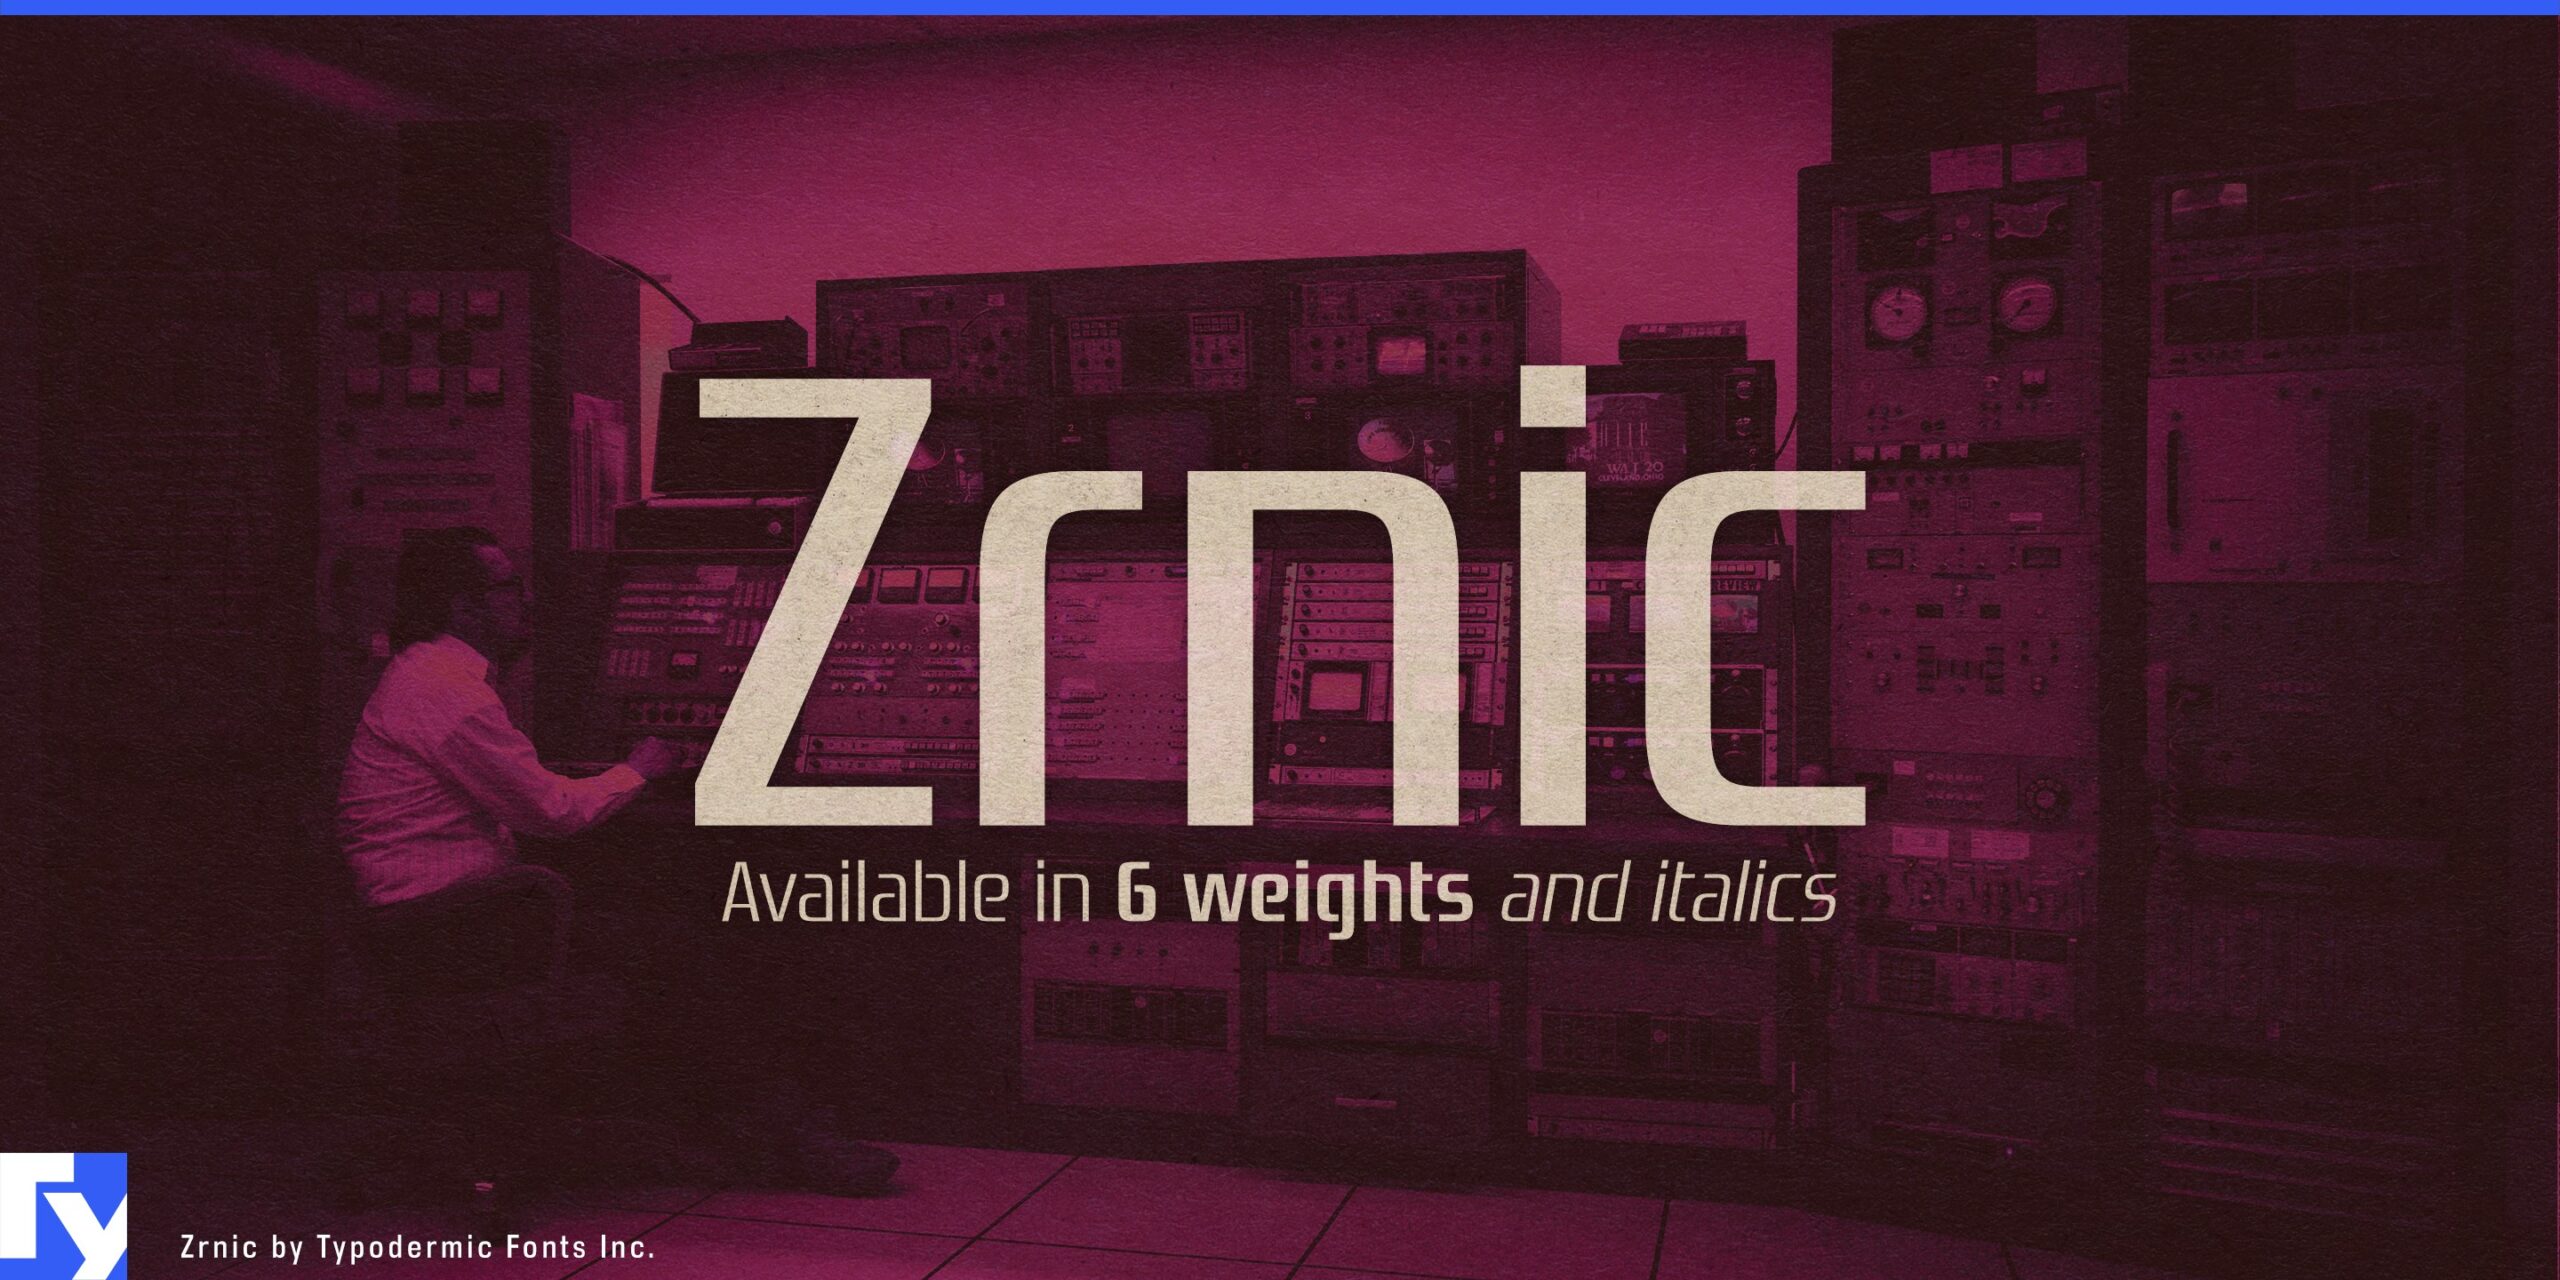 Conveying High-Tech Excellence: Zrnic Typeface at Your Service